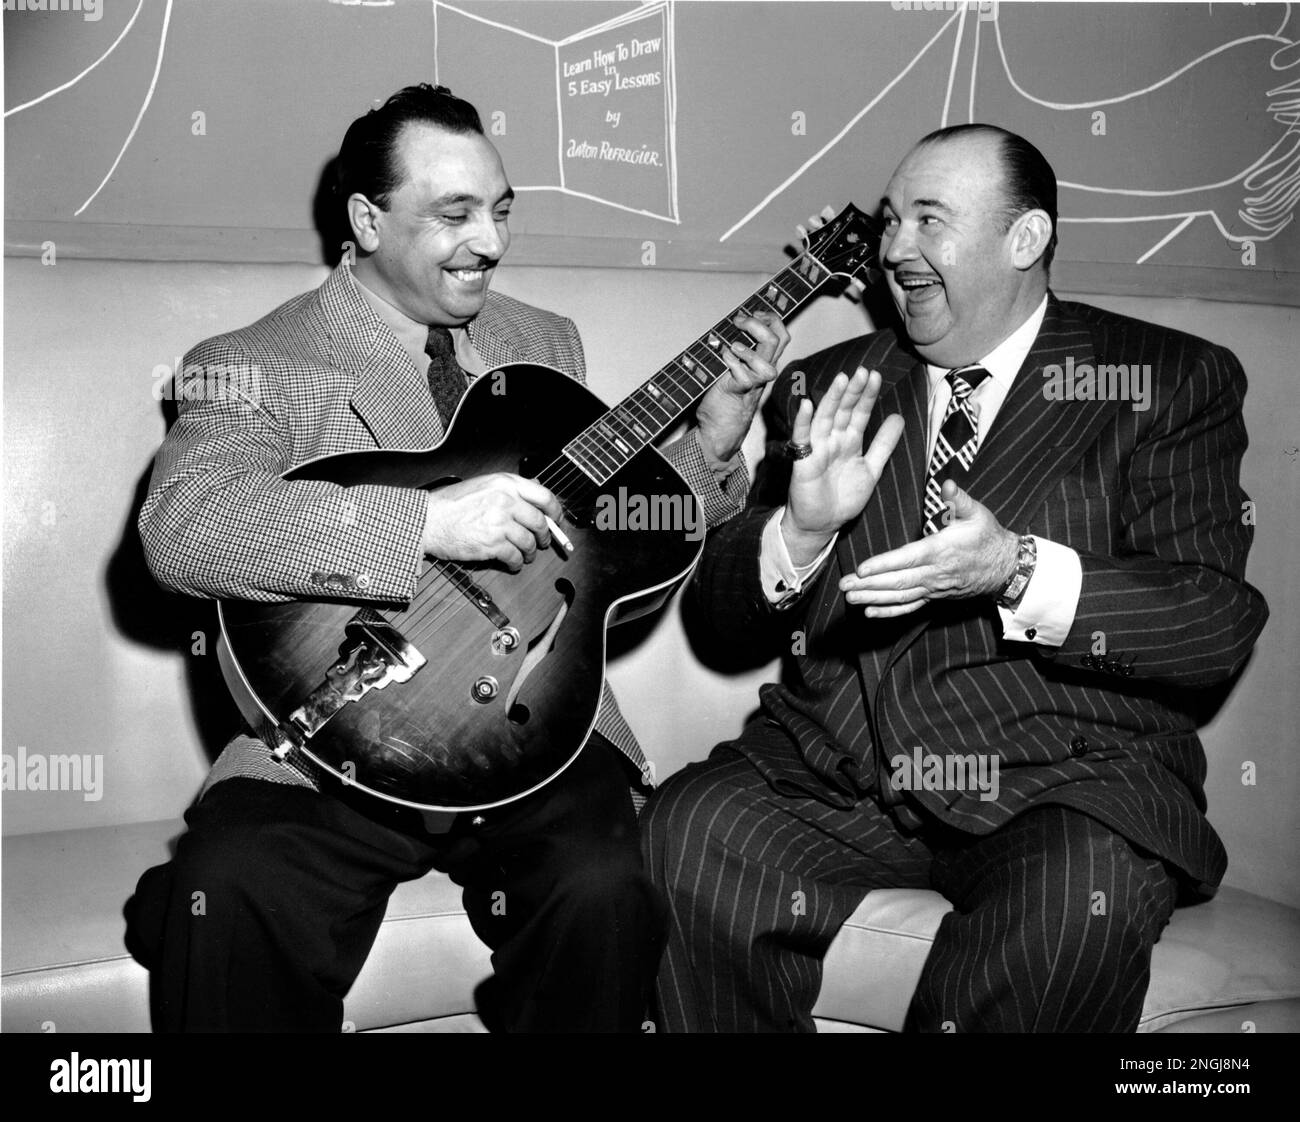 Jazz guitar virtuoso Django Reinhardt, the "Belgium Gypsy," demonstrates his technique to "King of Jazz" Paul Whiteman at Cafe Society Uptown in New York, Dec. 19, 1946. Reinhardt, who formed France's popular Quintette of the Hot Club of France, perfected an unusual playing style due to an injury to the fingers of his left hand. (AP Photo) Stock Photo